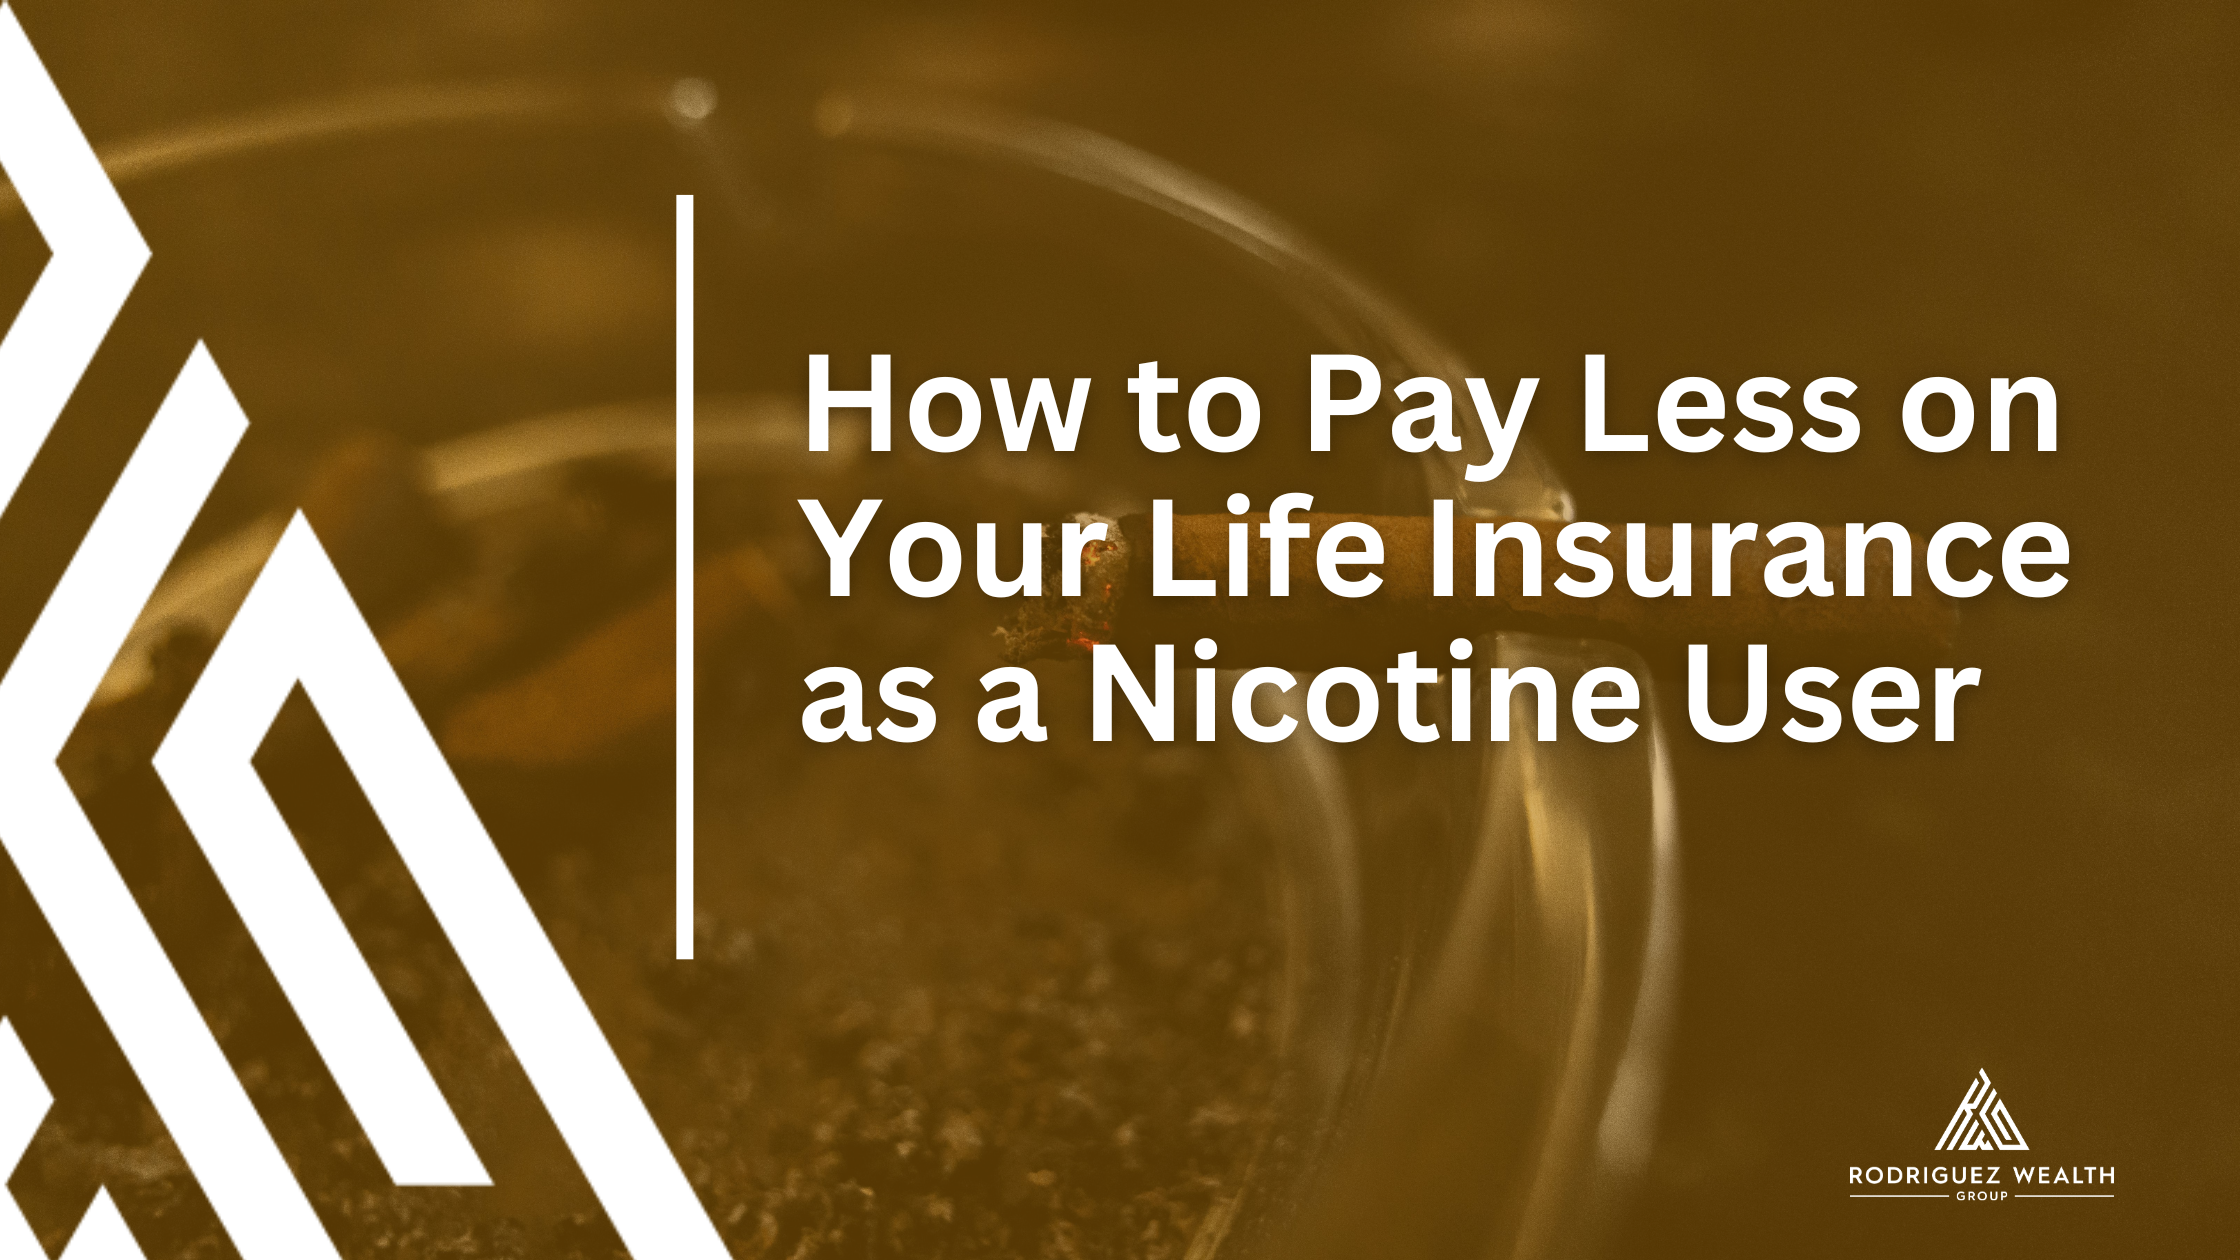 How to Pay Less on Your Life Insurance as a Nicotine User